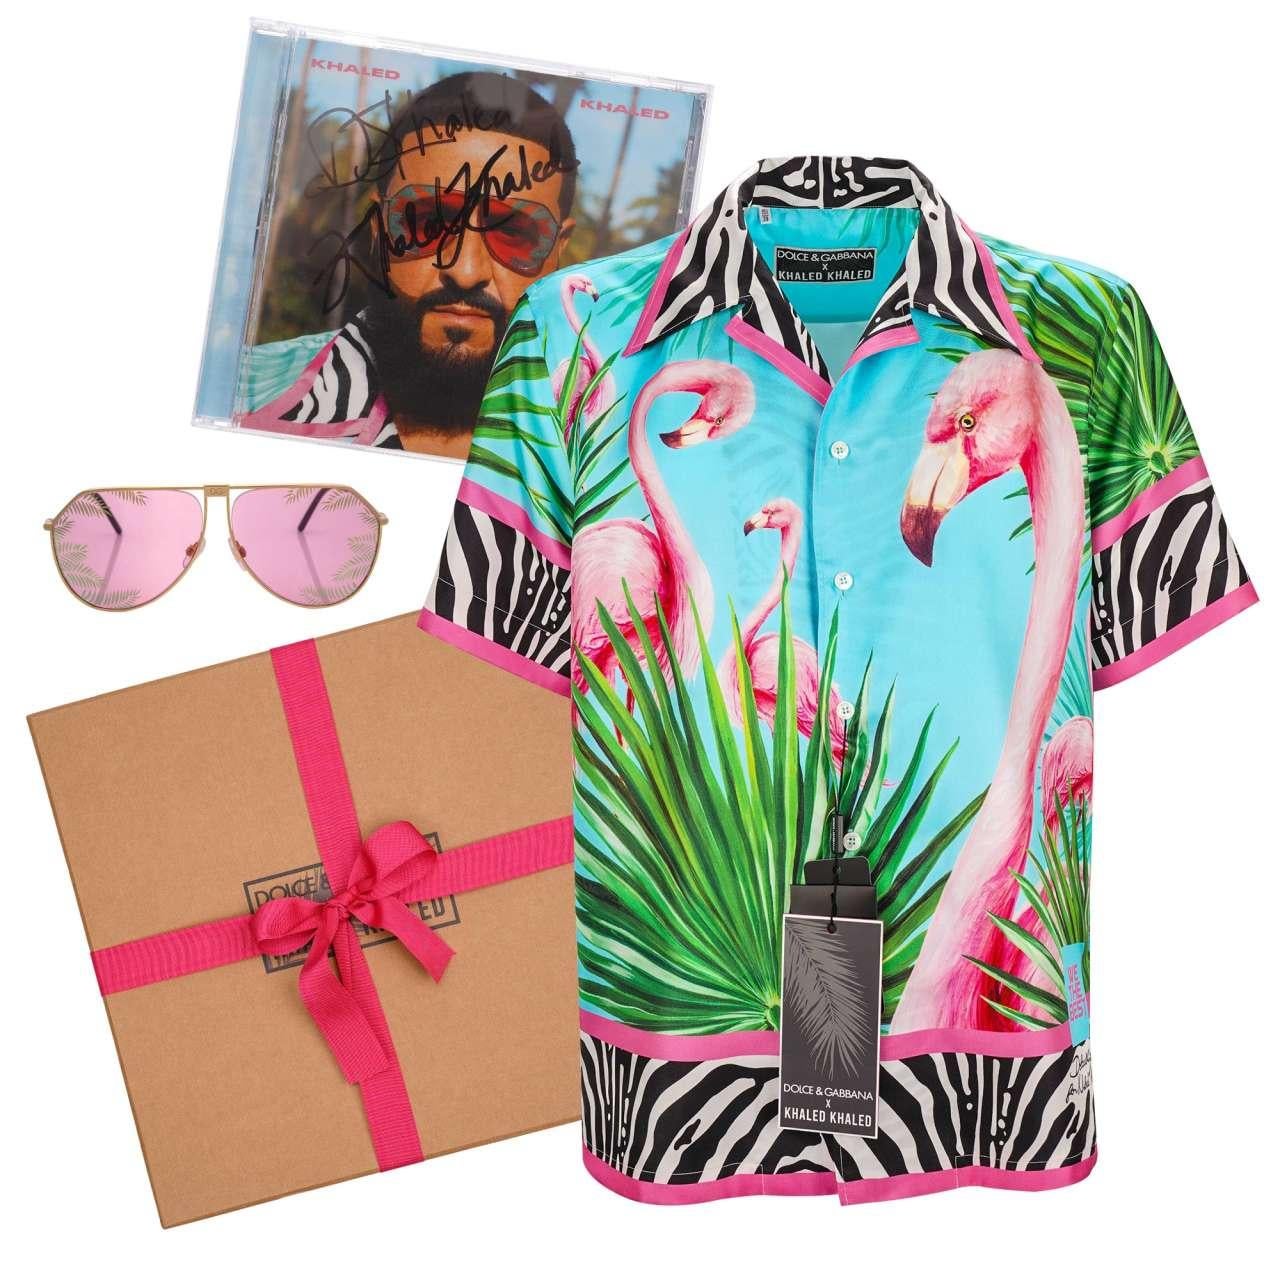 - Special edition by DJ Khaled and DG with Silk Flamingo and Zebra print shirt, tropical Sunglasses and signed CD by DOLCE & GABBANA X KHALED KHALED - New with special Box - Former RRP: EUR 1,255 - MADE IN ITALY - Wide F- Model: I5661M-FI17U-HT3IV -